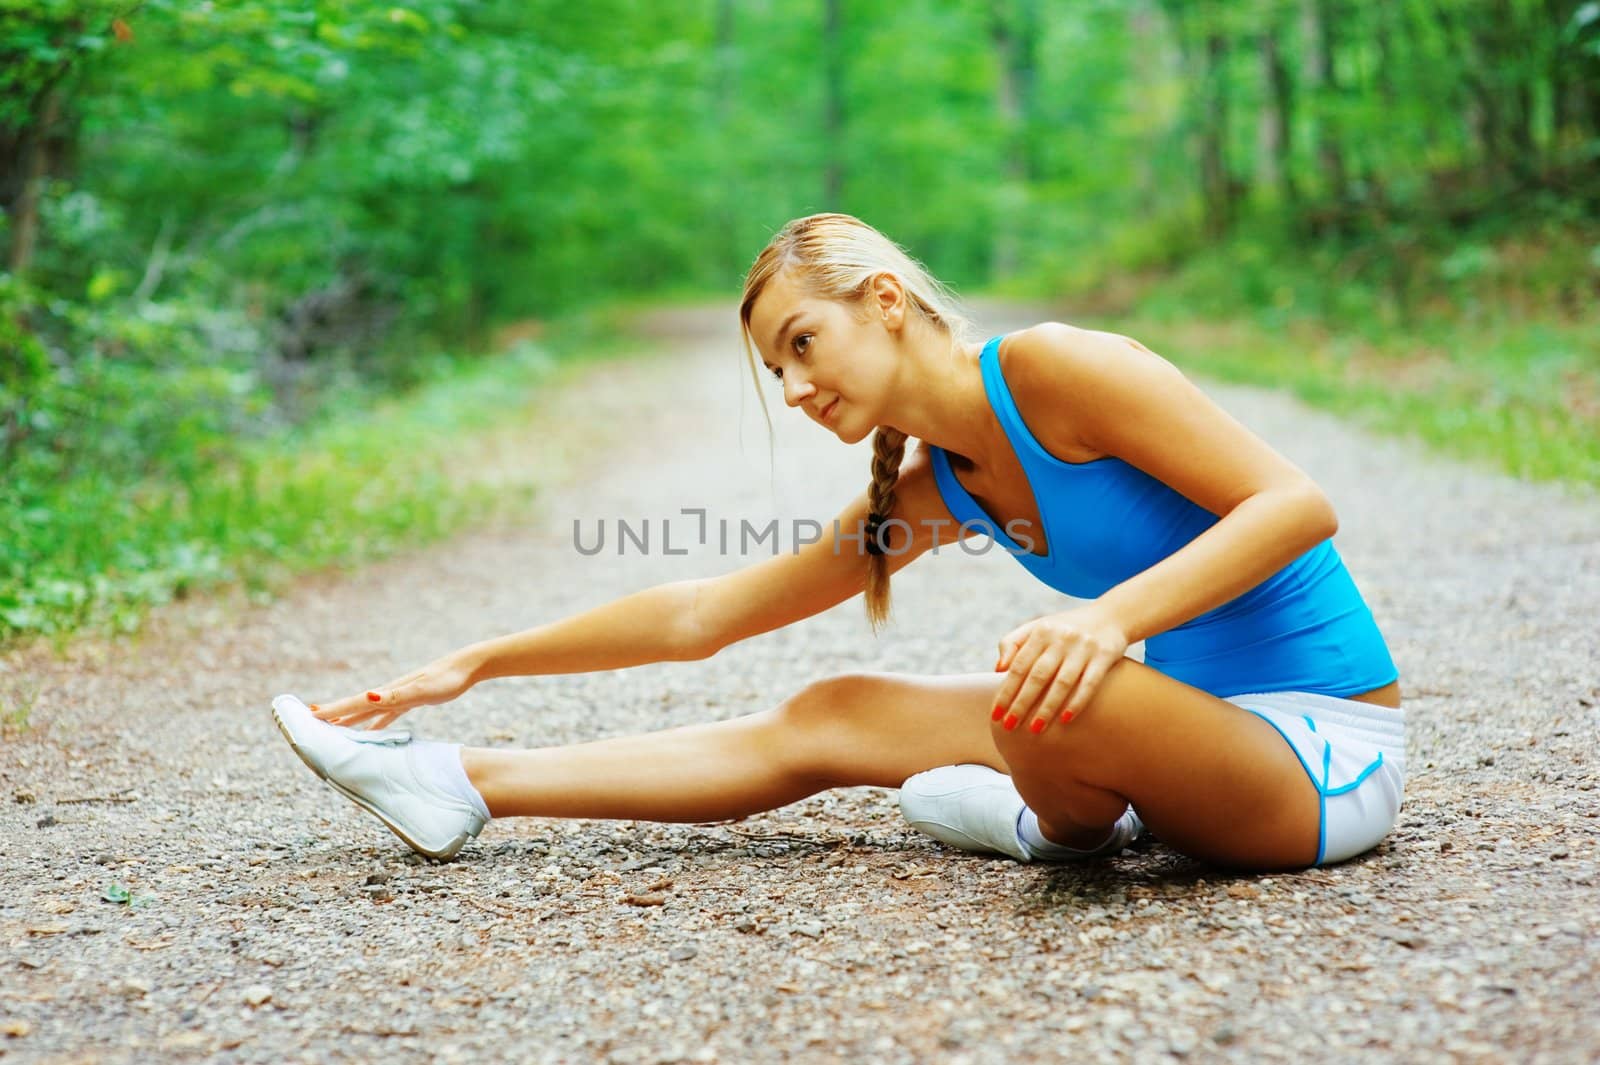 Woman runner exercising, from a complete series of photos.